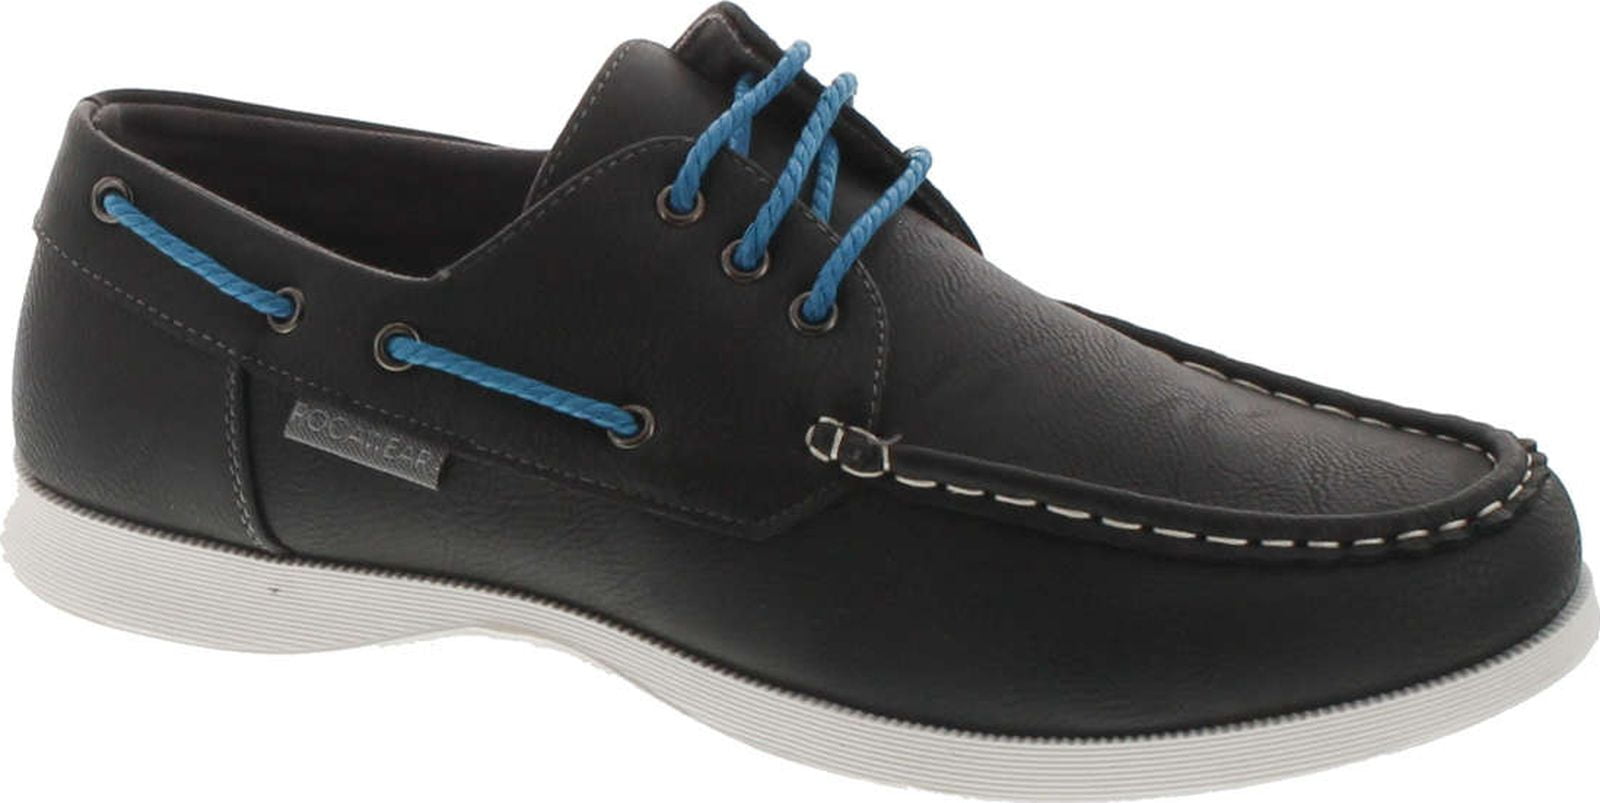 Rocawear - Rocawear Men's Max-01 Lace-Up Oxford Boat Shoes - Walmart ...